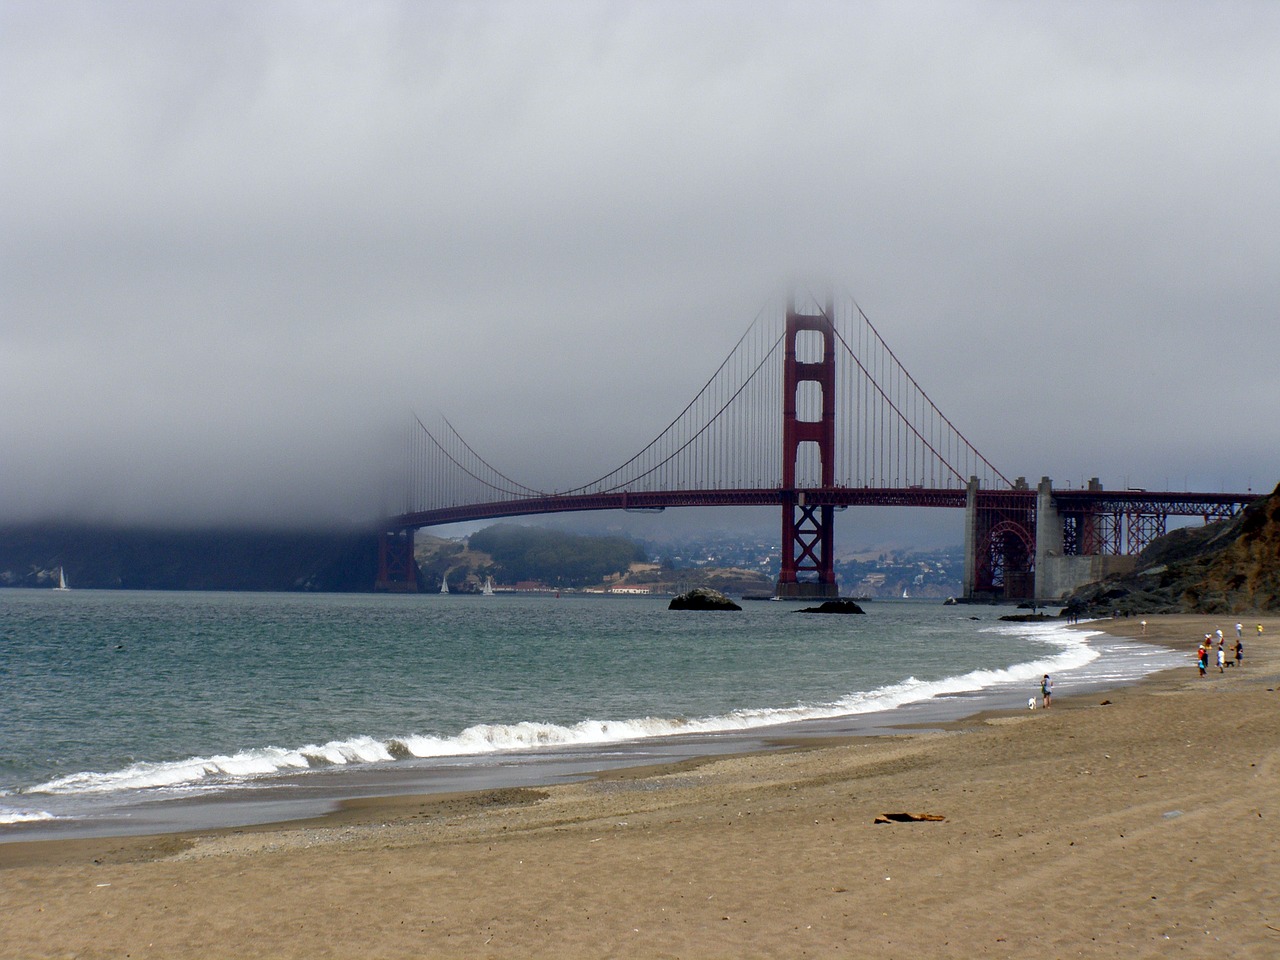 Golden Gate Bridge in San Francisco on a dull weather day